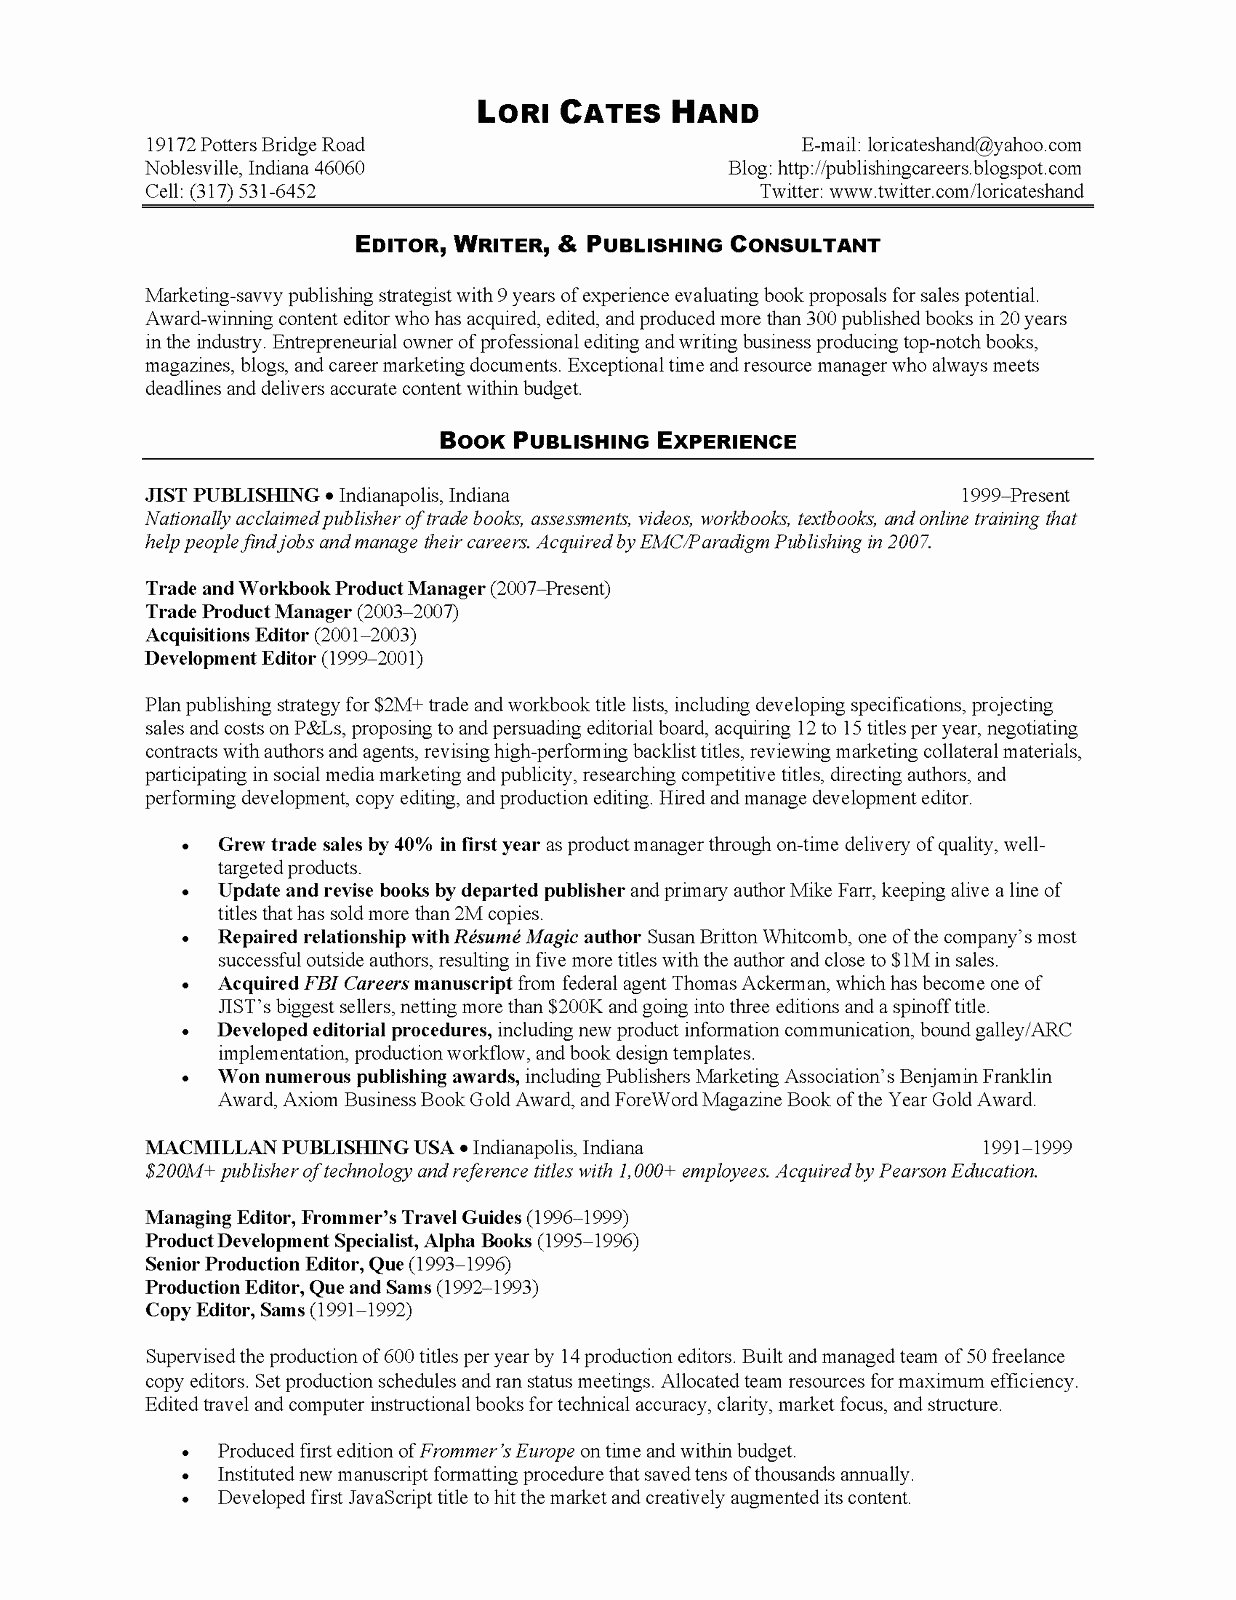 Medical Assistant Resume Pediatric Medical Assistant Resume The Proper Cover Letter For A